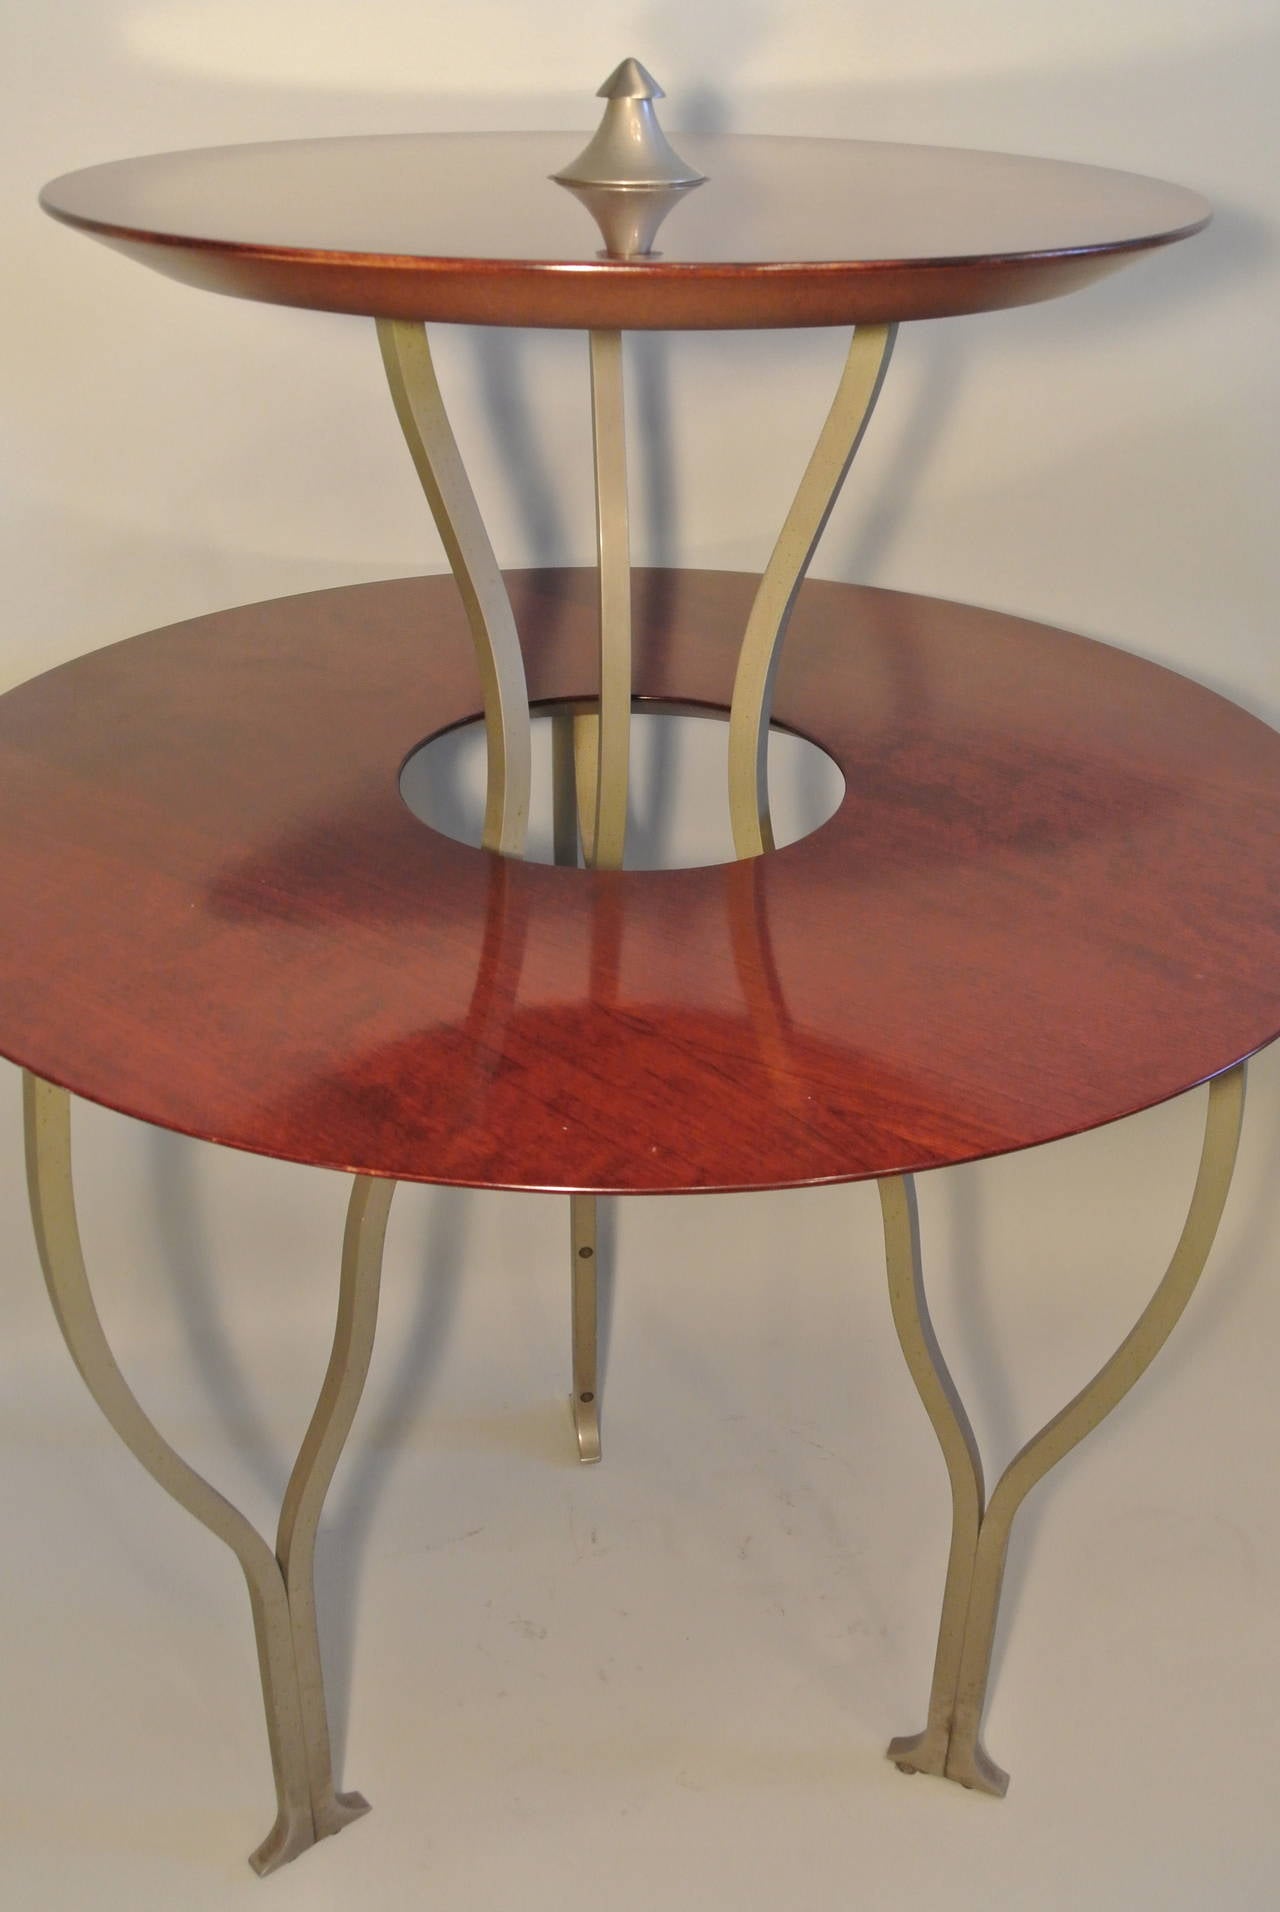 Bi-level round table in solid mahogany (3cm thick) with metal feet from the 20th century. Measure: Height 89cm, width 65cm.